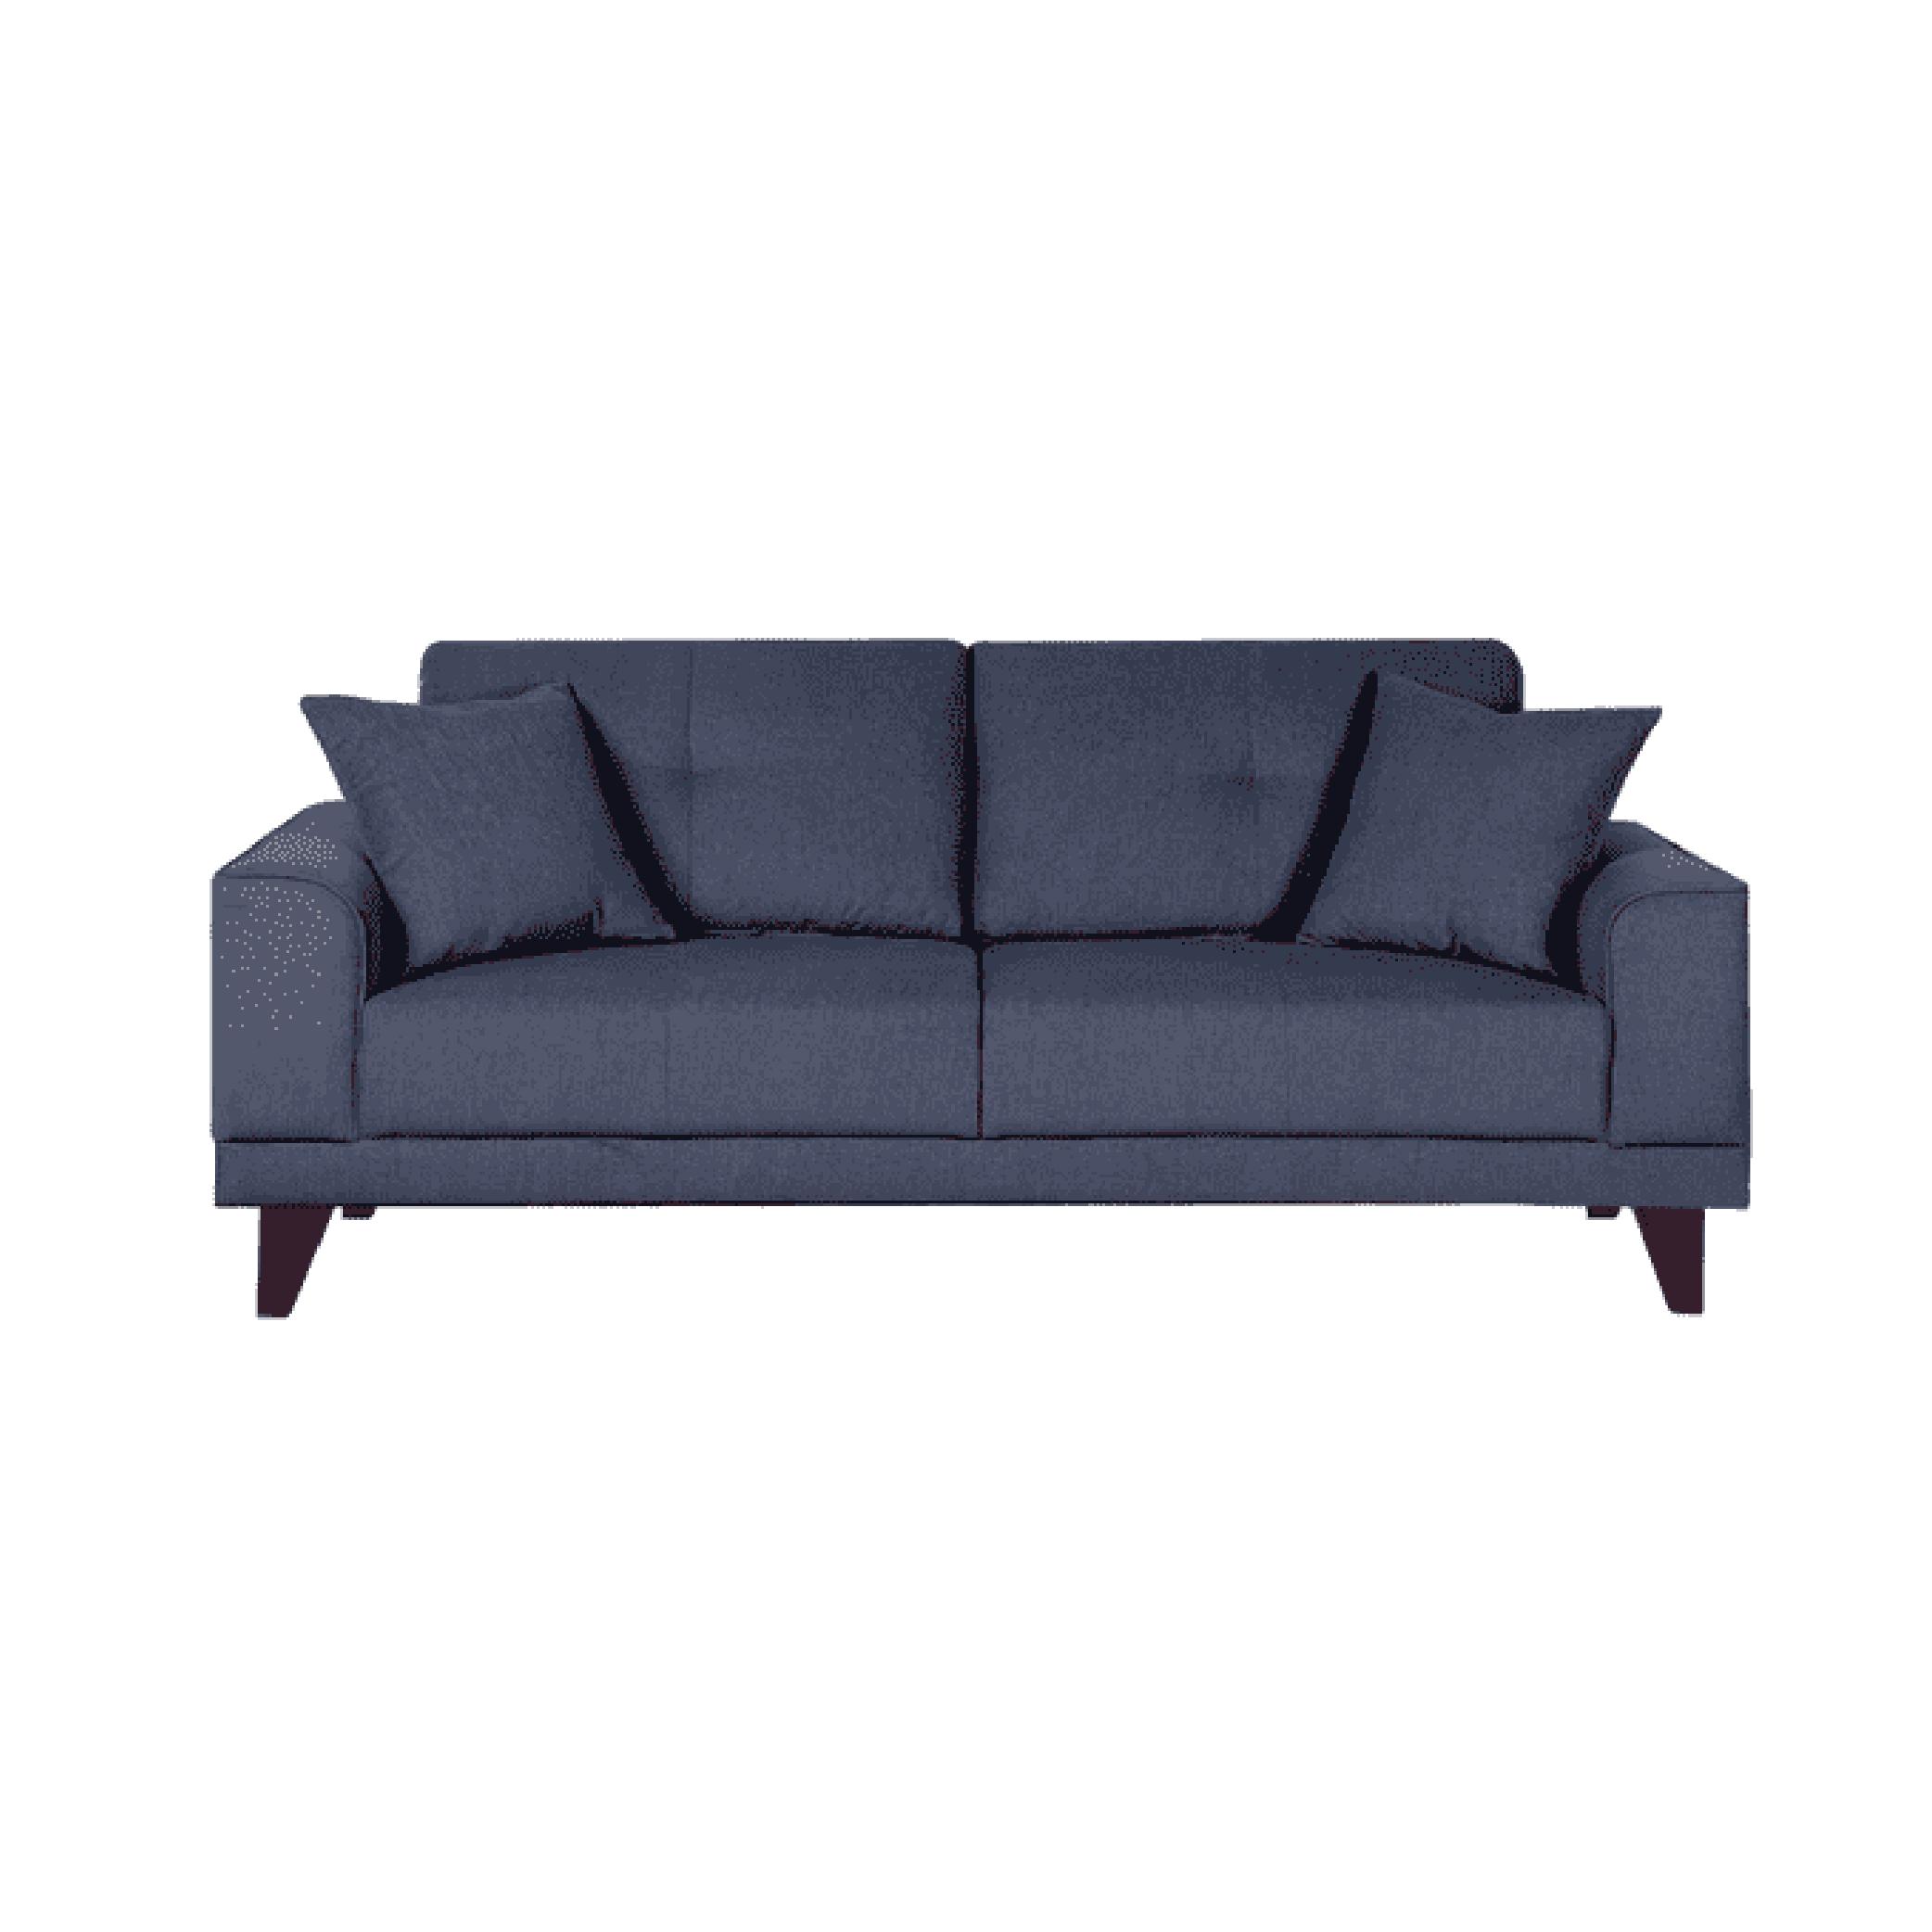 Arco Three Seater Sofa in Navy Blue Colour